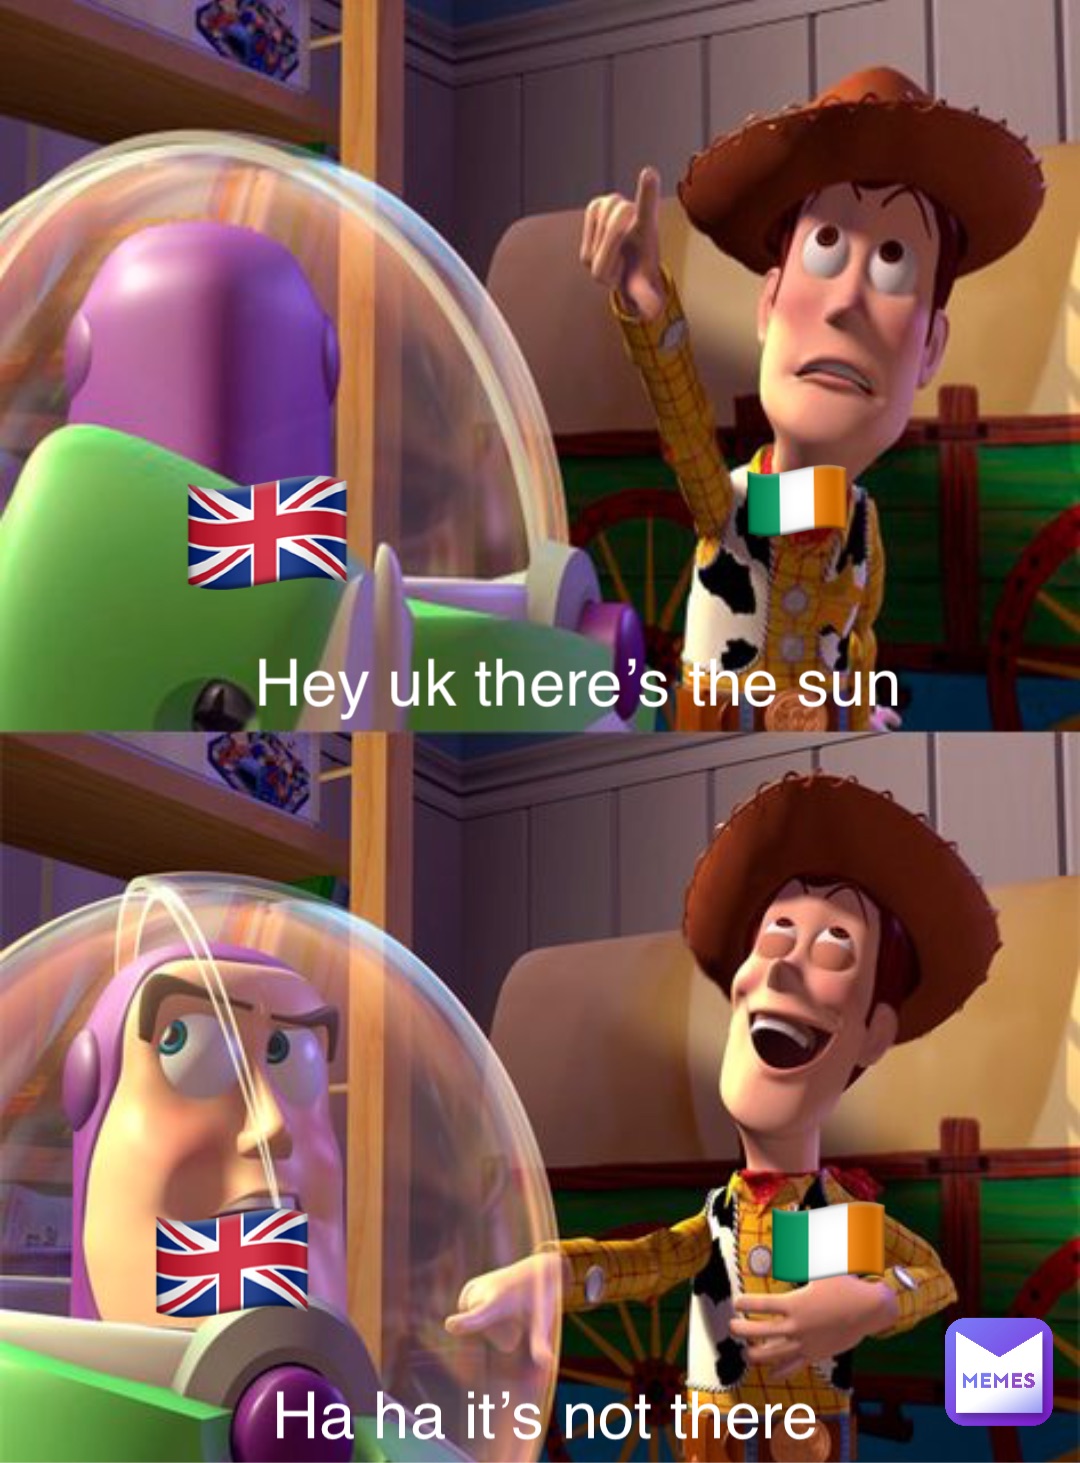 Hey uk there’s the sun Ha ha it’s not there I trolled you 🇬🇧 🇬🇧 🇮🇪 🇮🇪